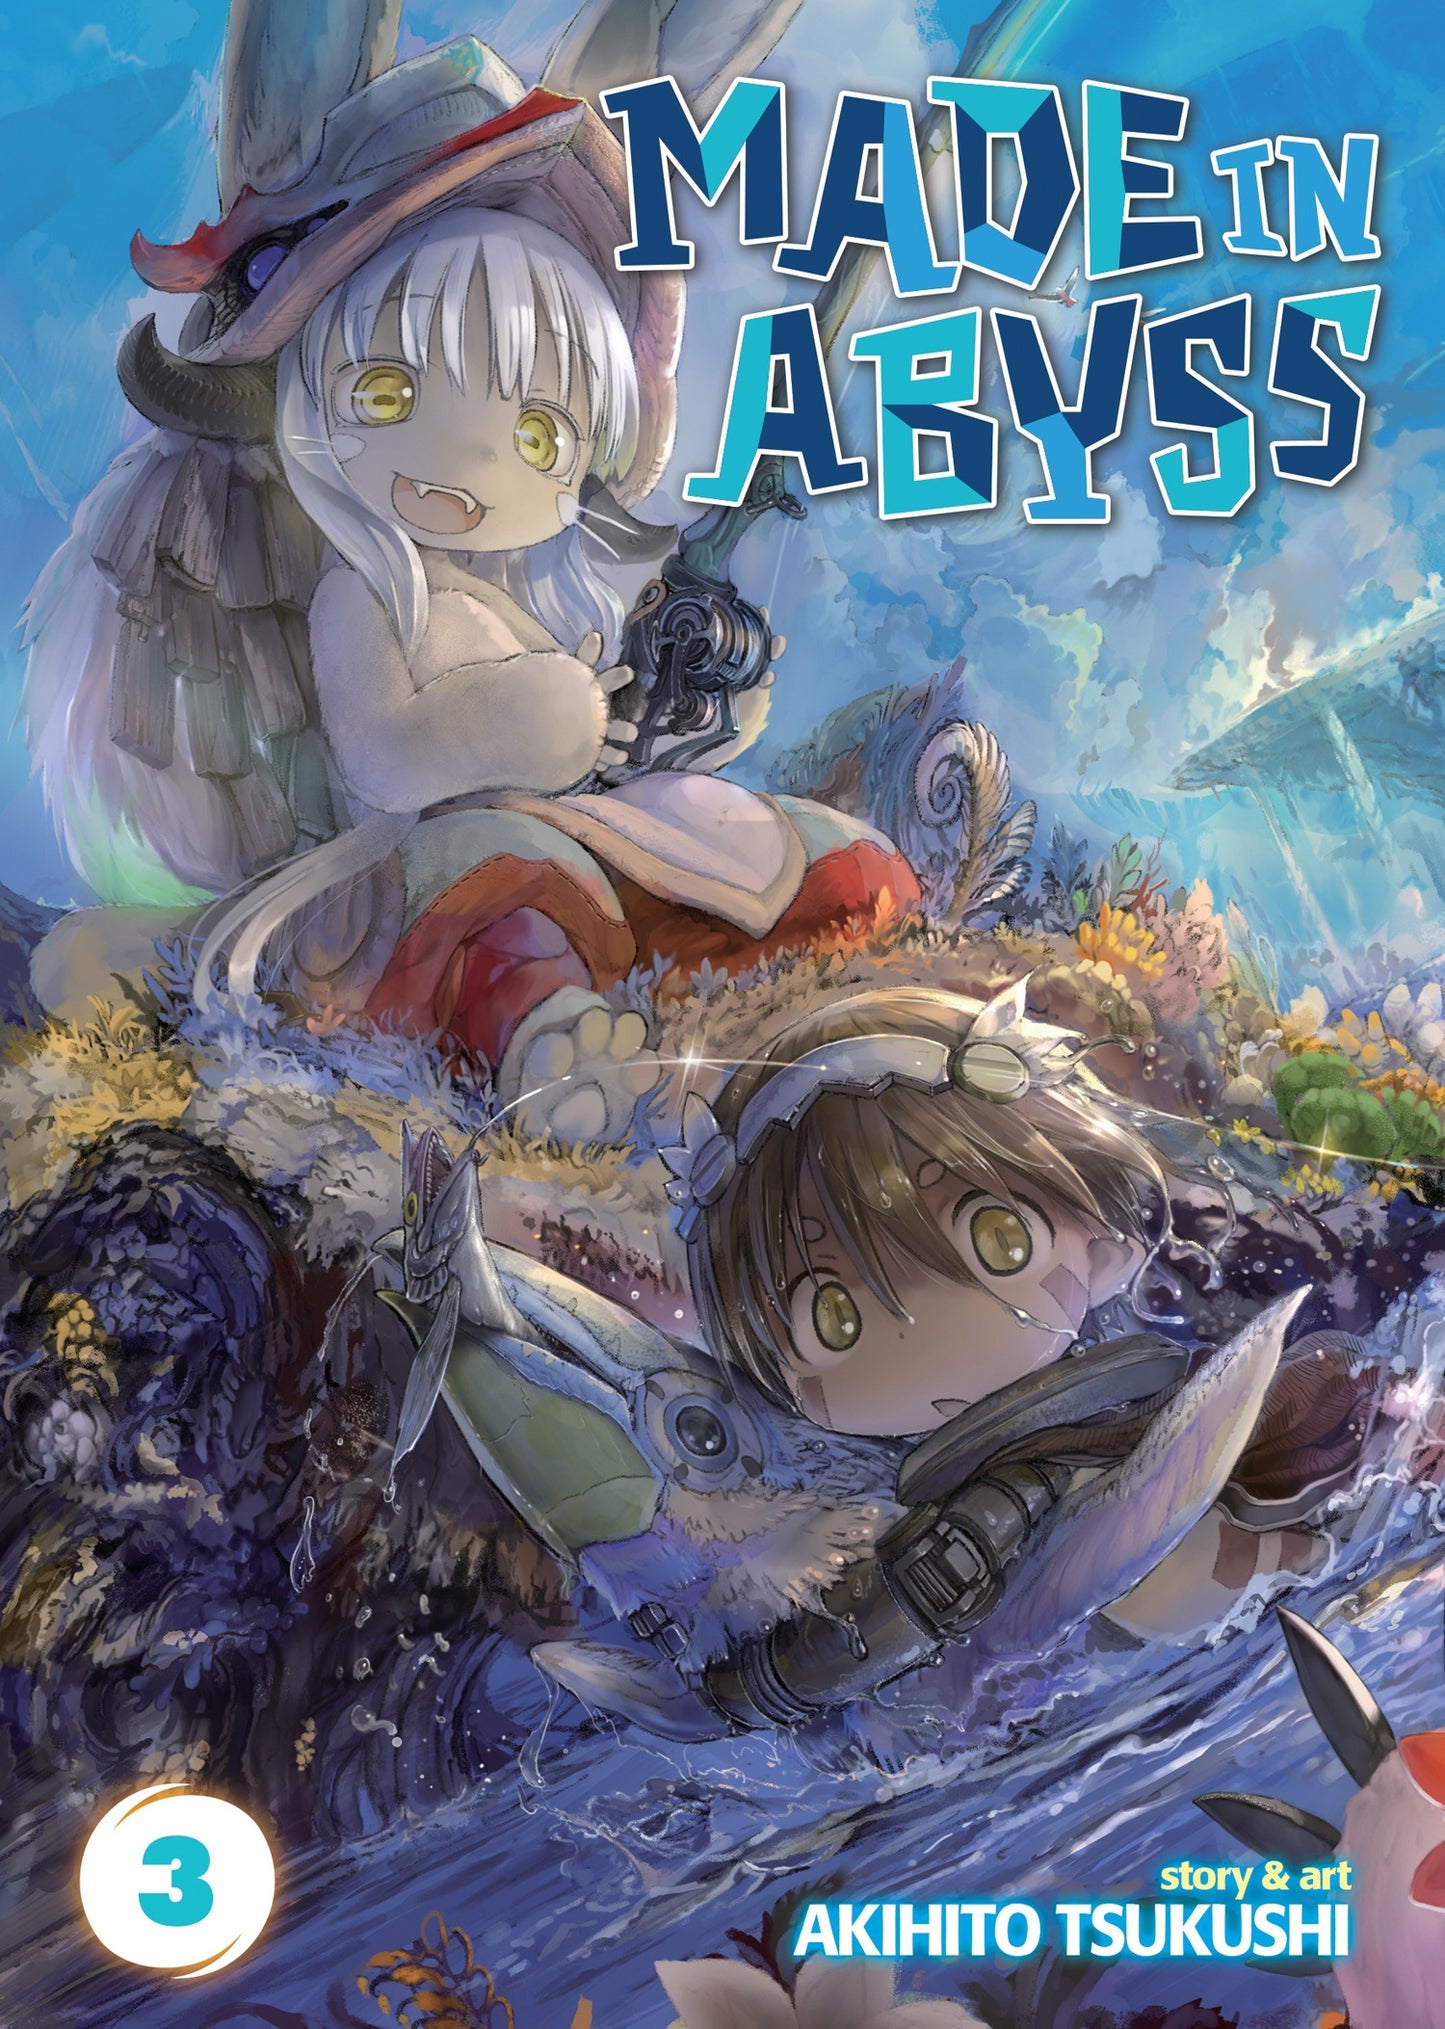 Made in Abyss Vol. 3 - Manga Warehouse